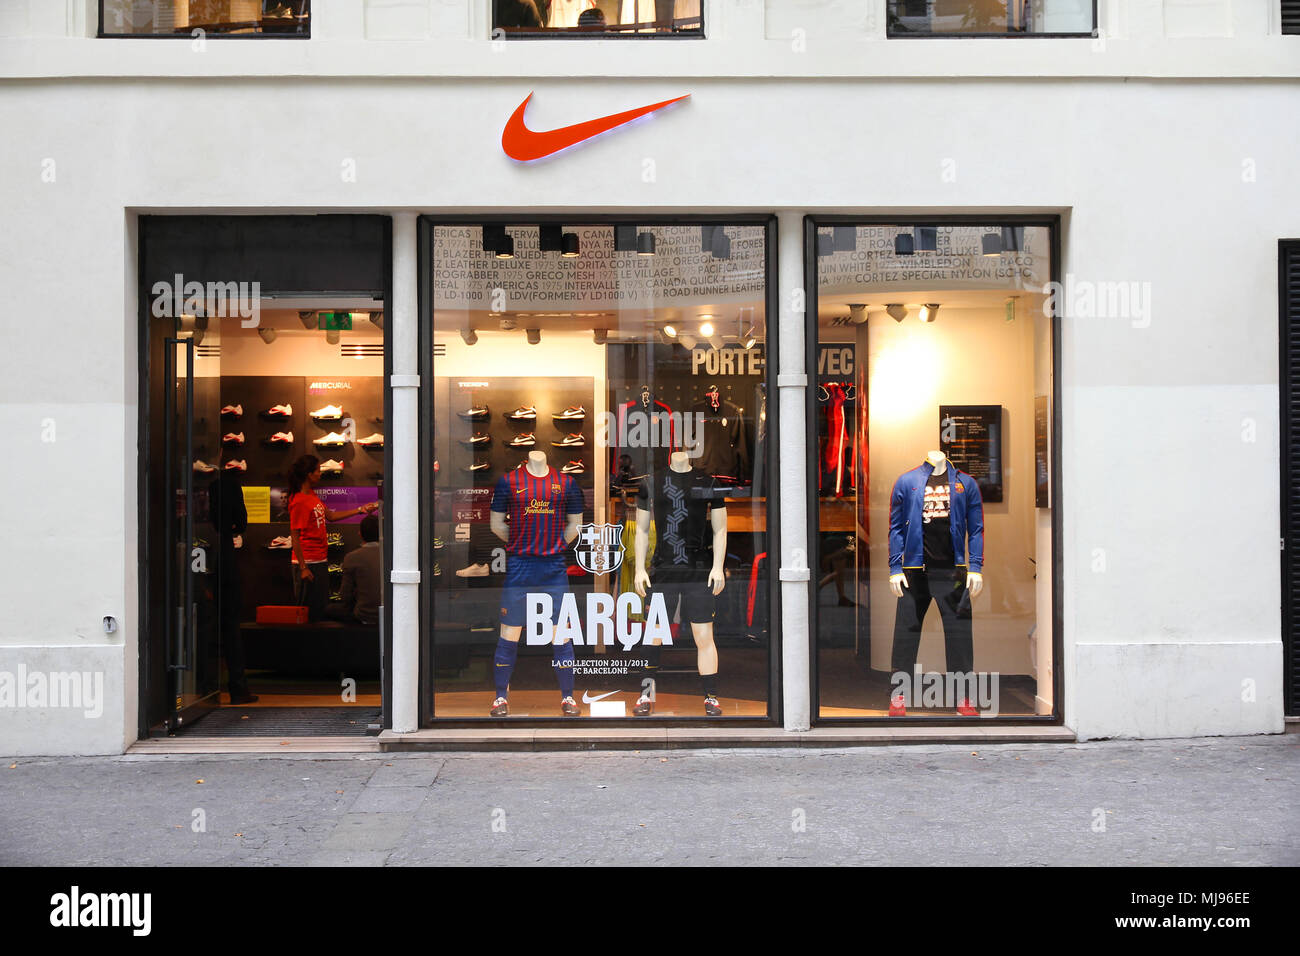 Nike store 2011 High Resolution Stock Photography and Images - Alamy